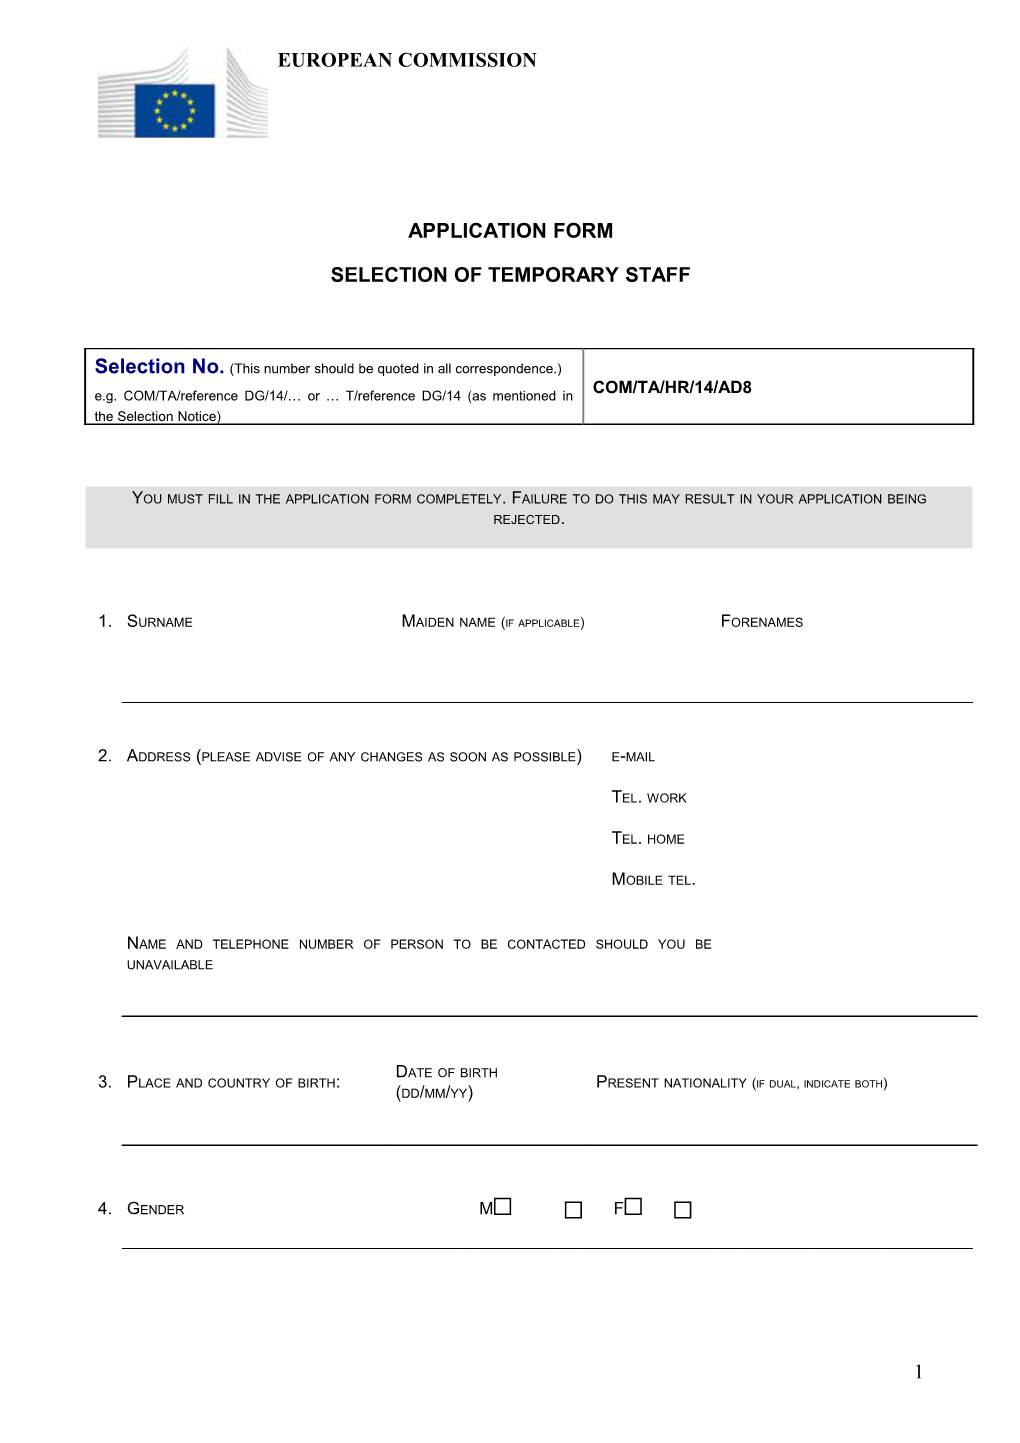 Application Form s52